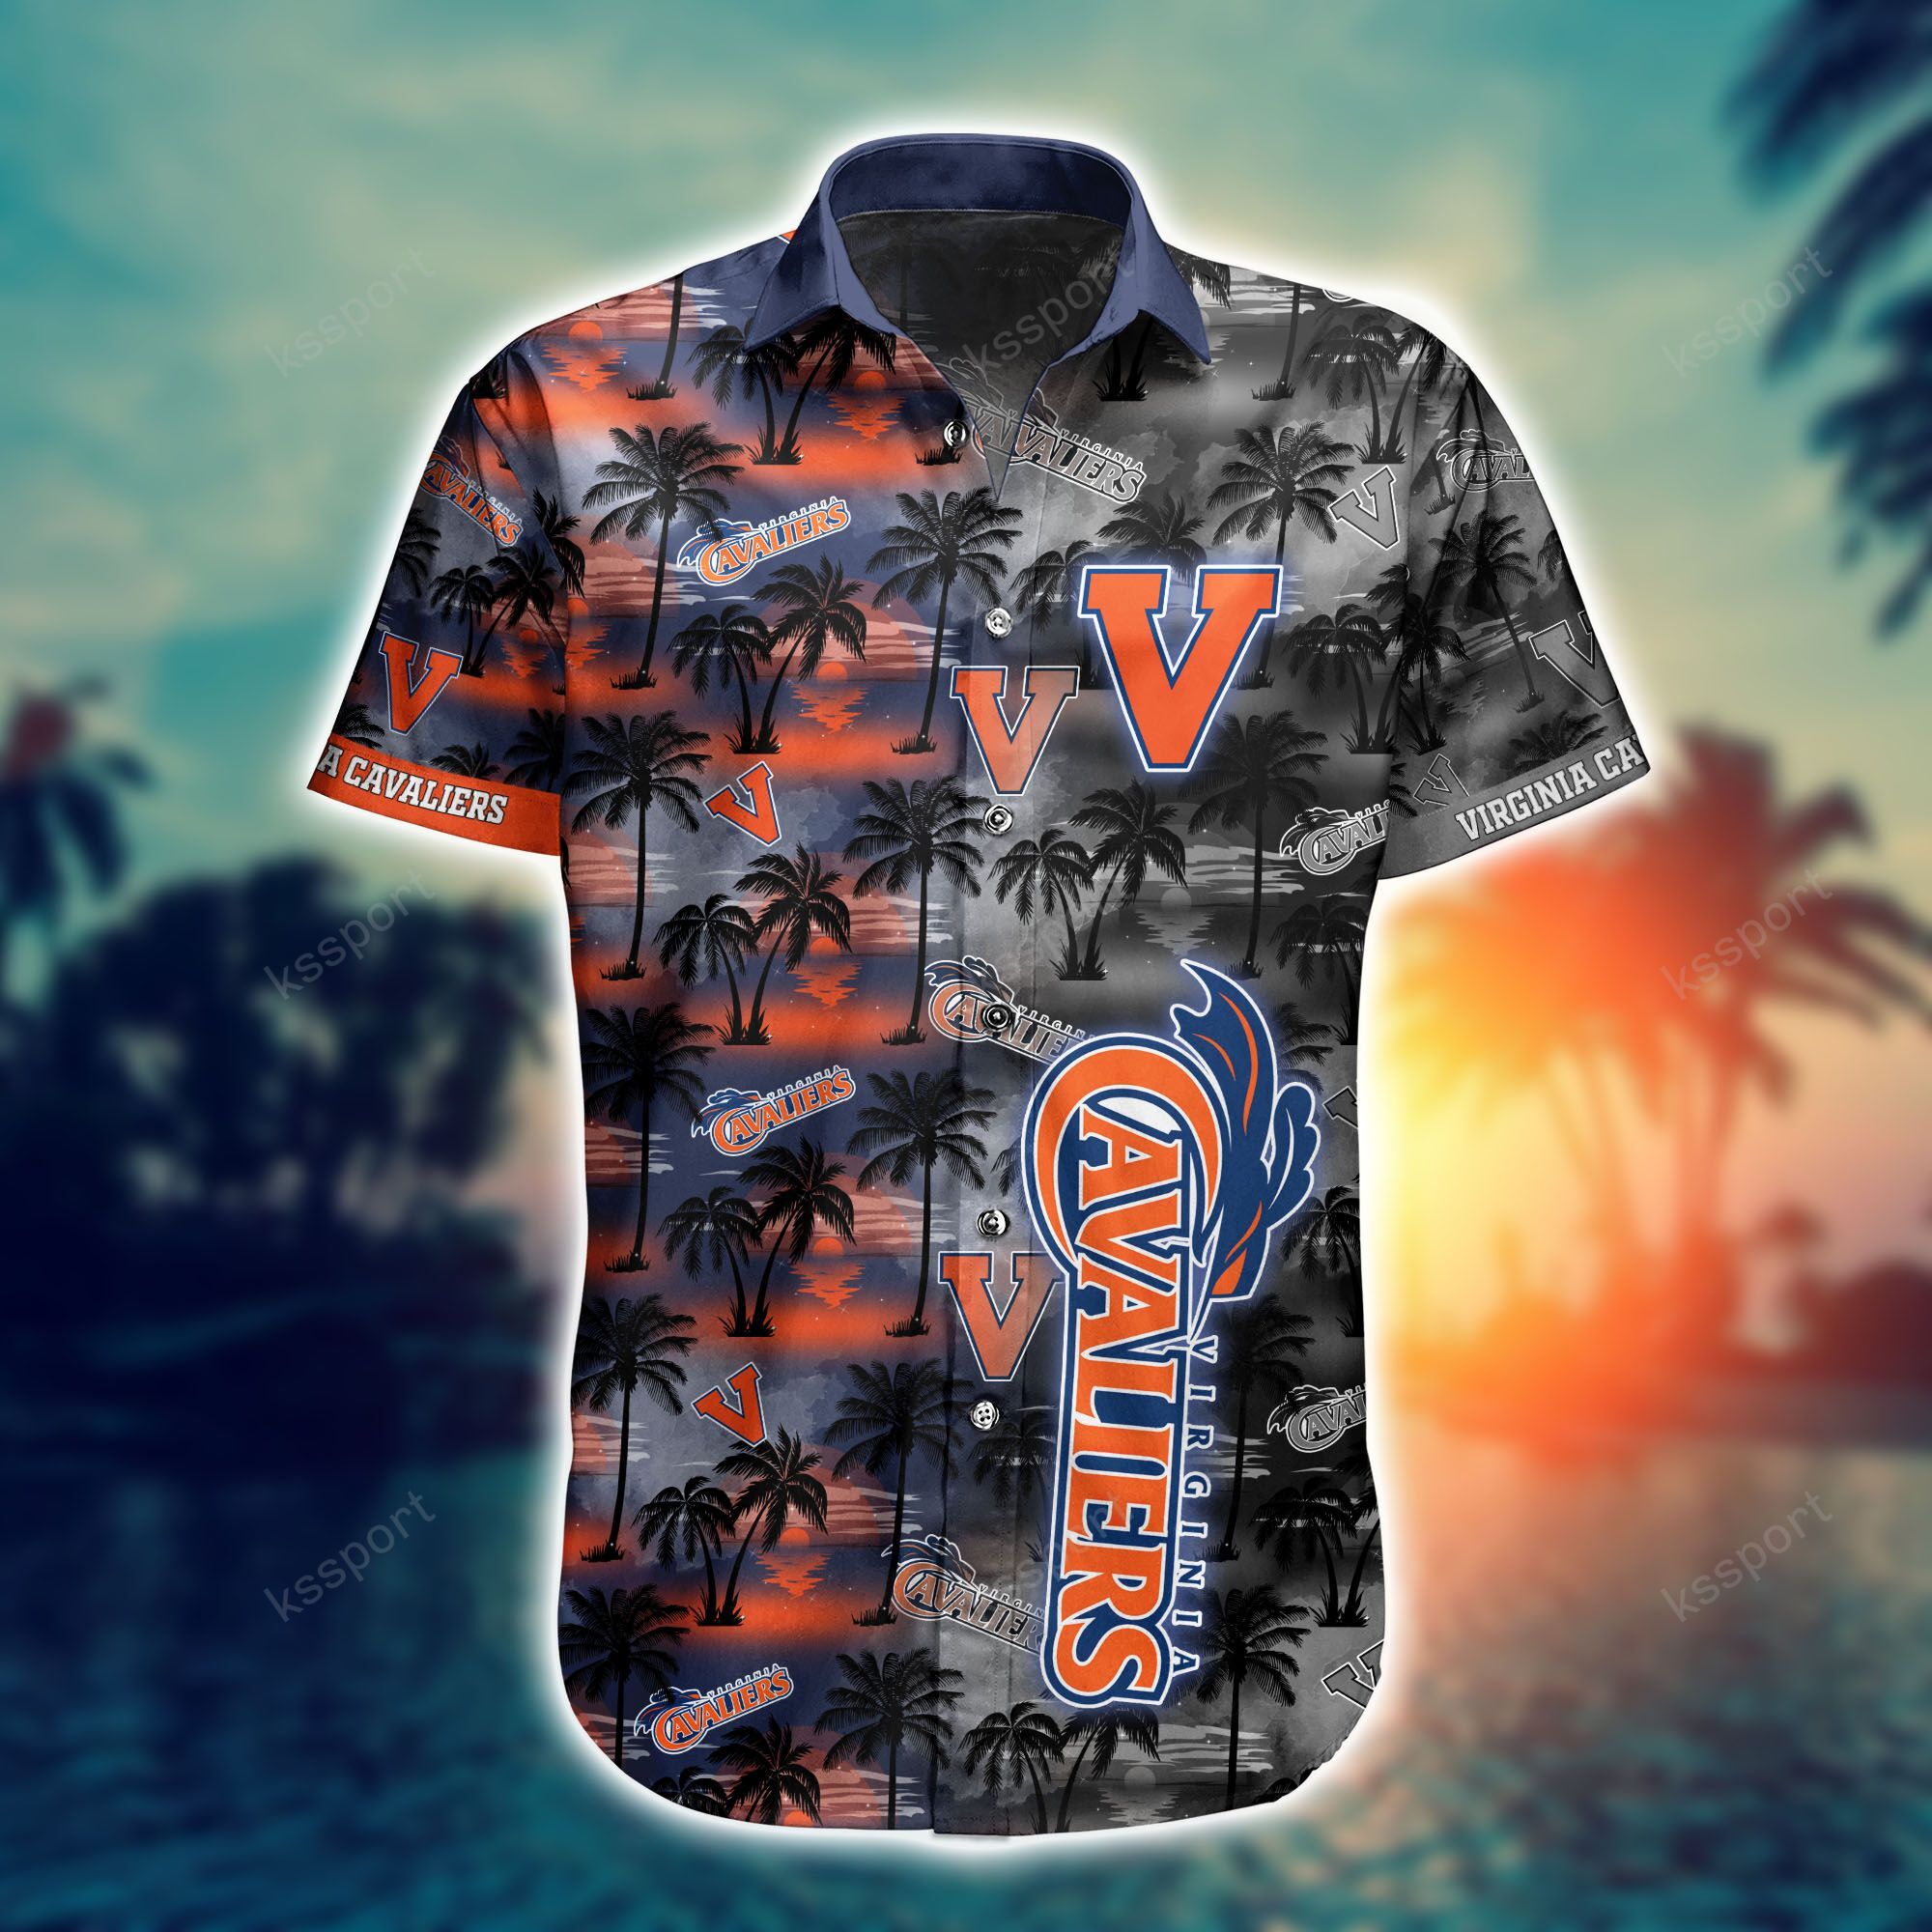 Top cool Hawaiian shirt 2022 - Make sure you get yours today before they run out! 185